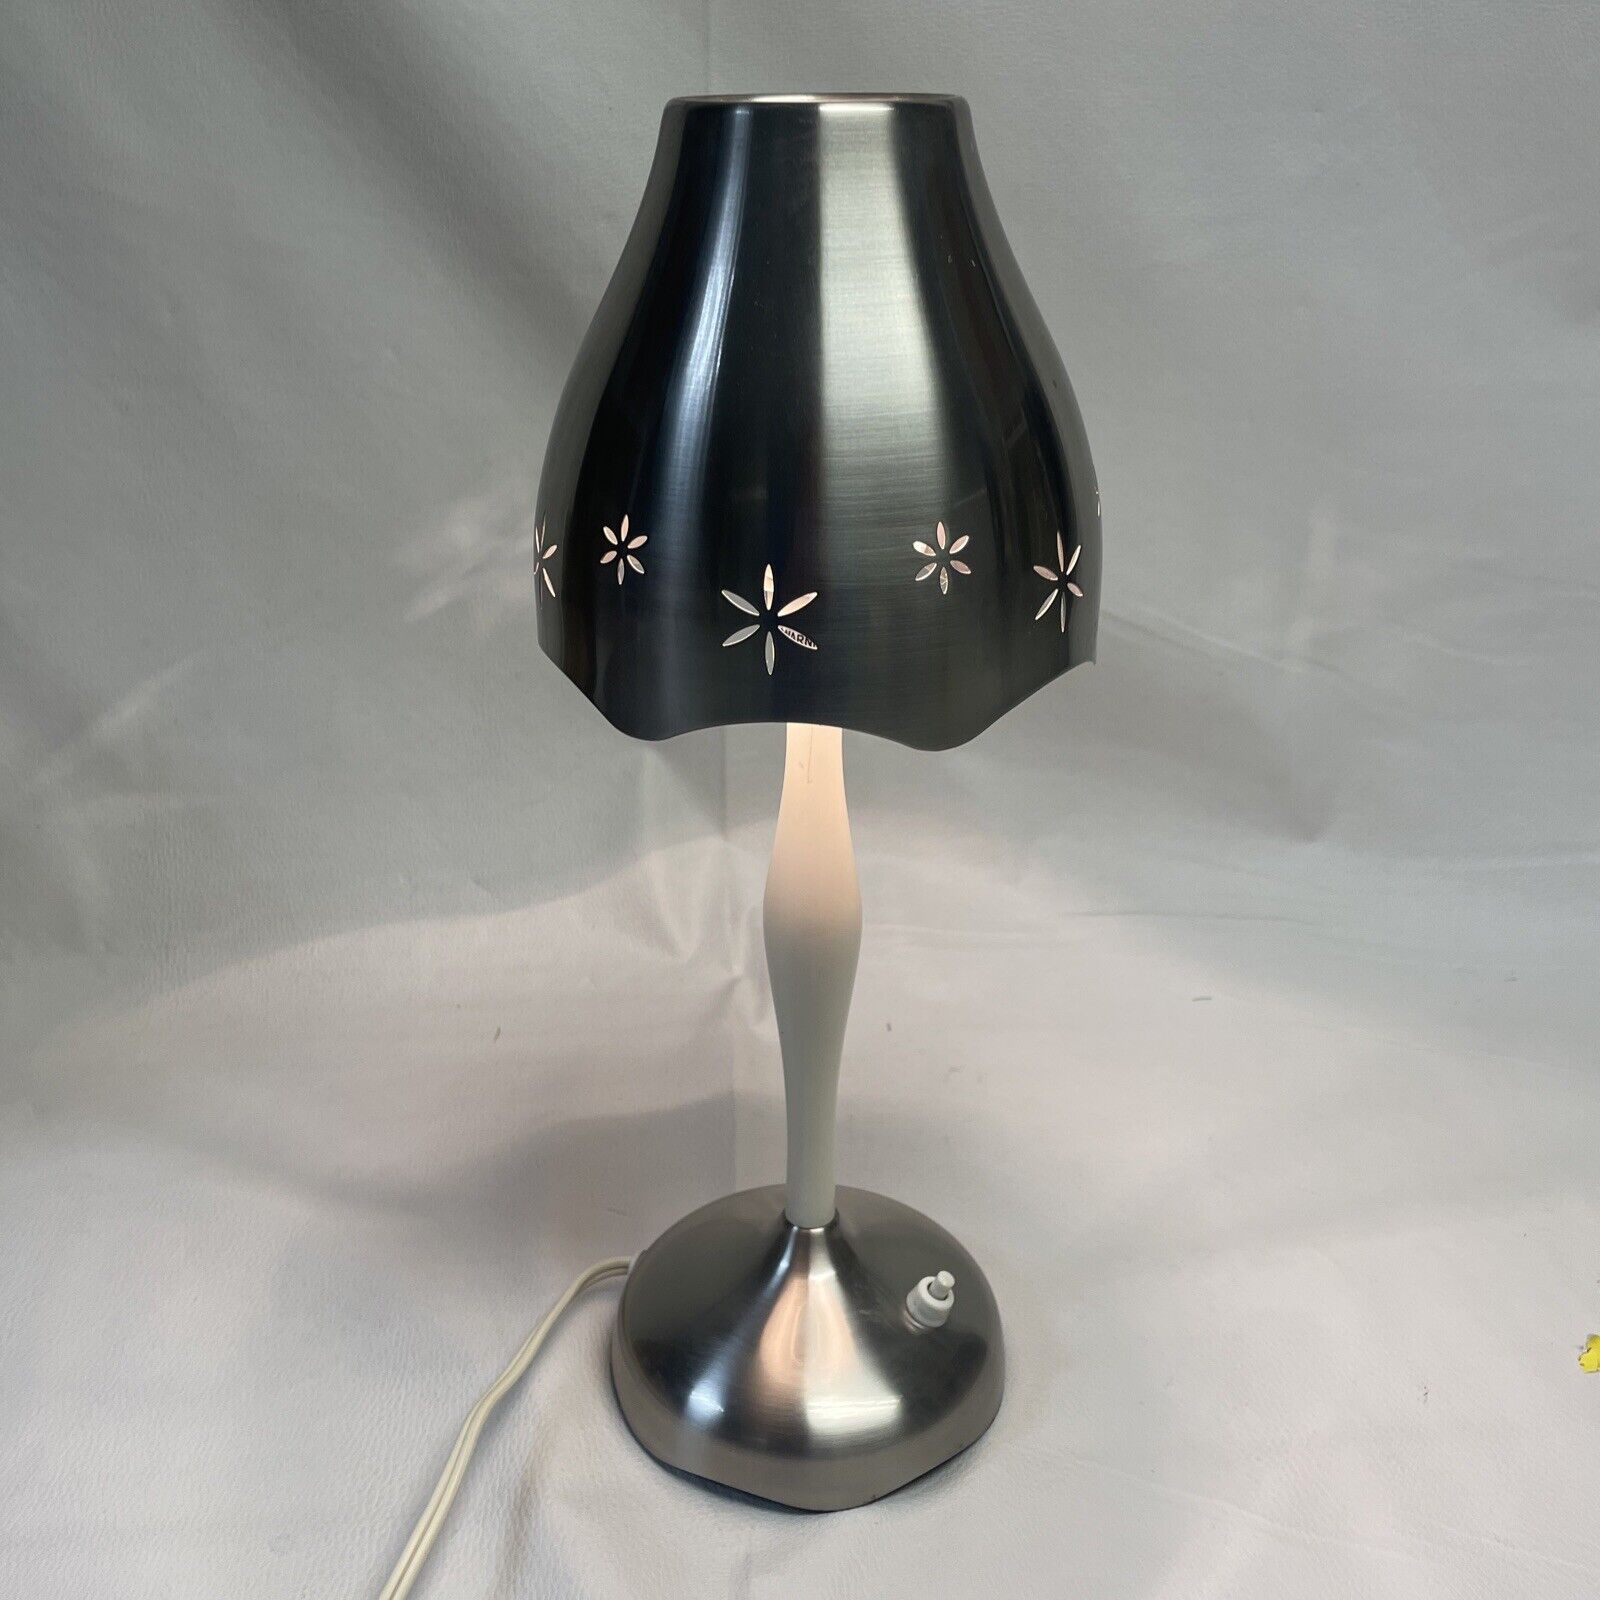 Vintage Ikea Table Lamp Stainless Base & Shade -Rare